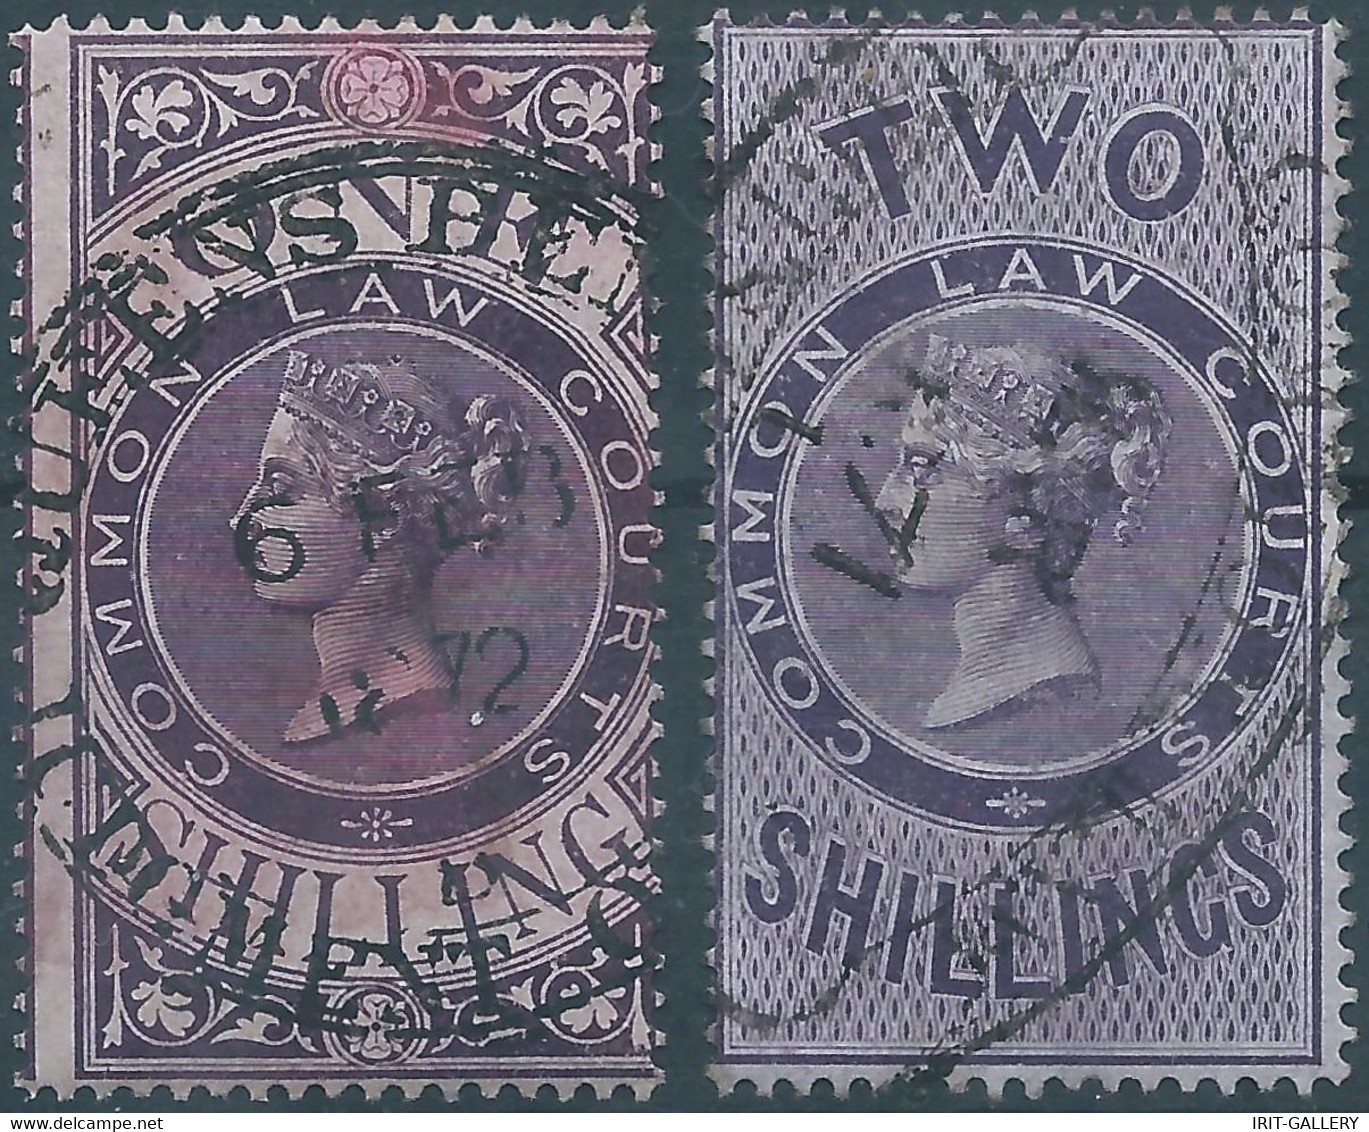 Great Britain-ENGLAND,Queen Victoria,1871-1872 Revenue Stamps Tax Fiscal COMMON LAW COURTS,1 & 2 Shillings,Used - Revenue Stamps